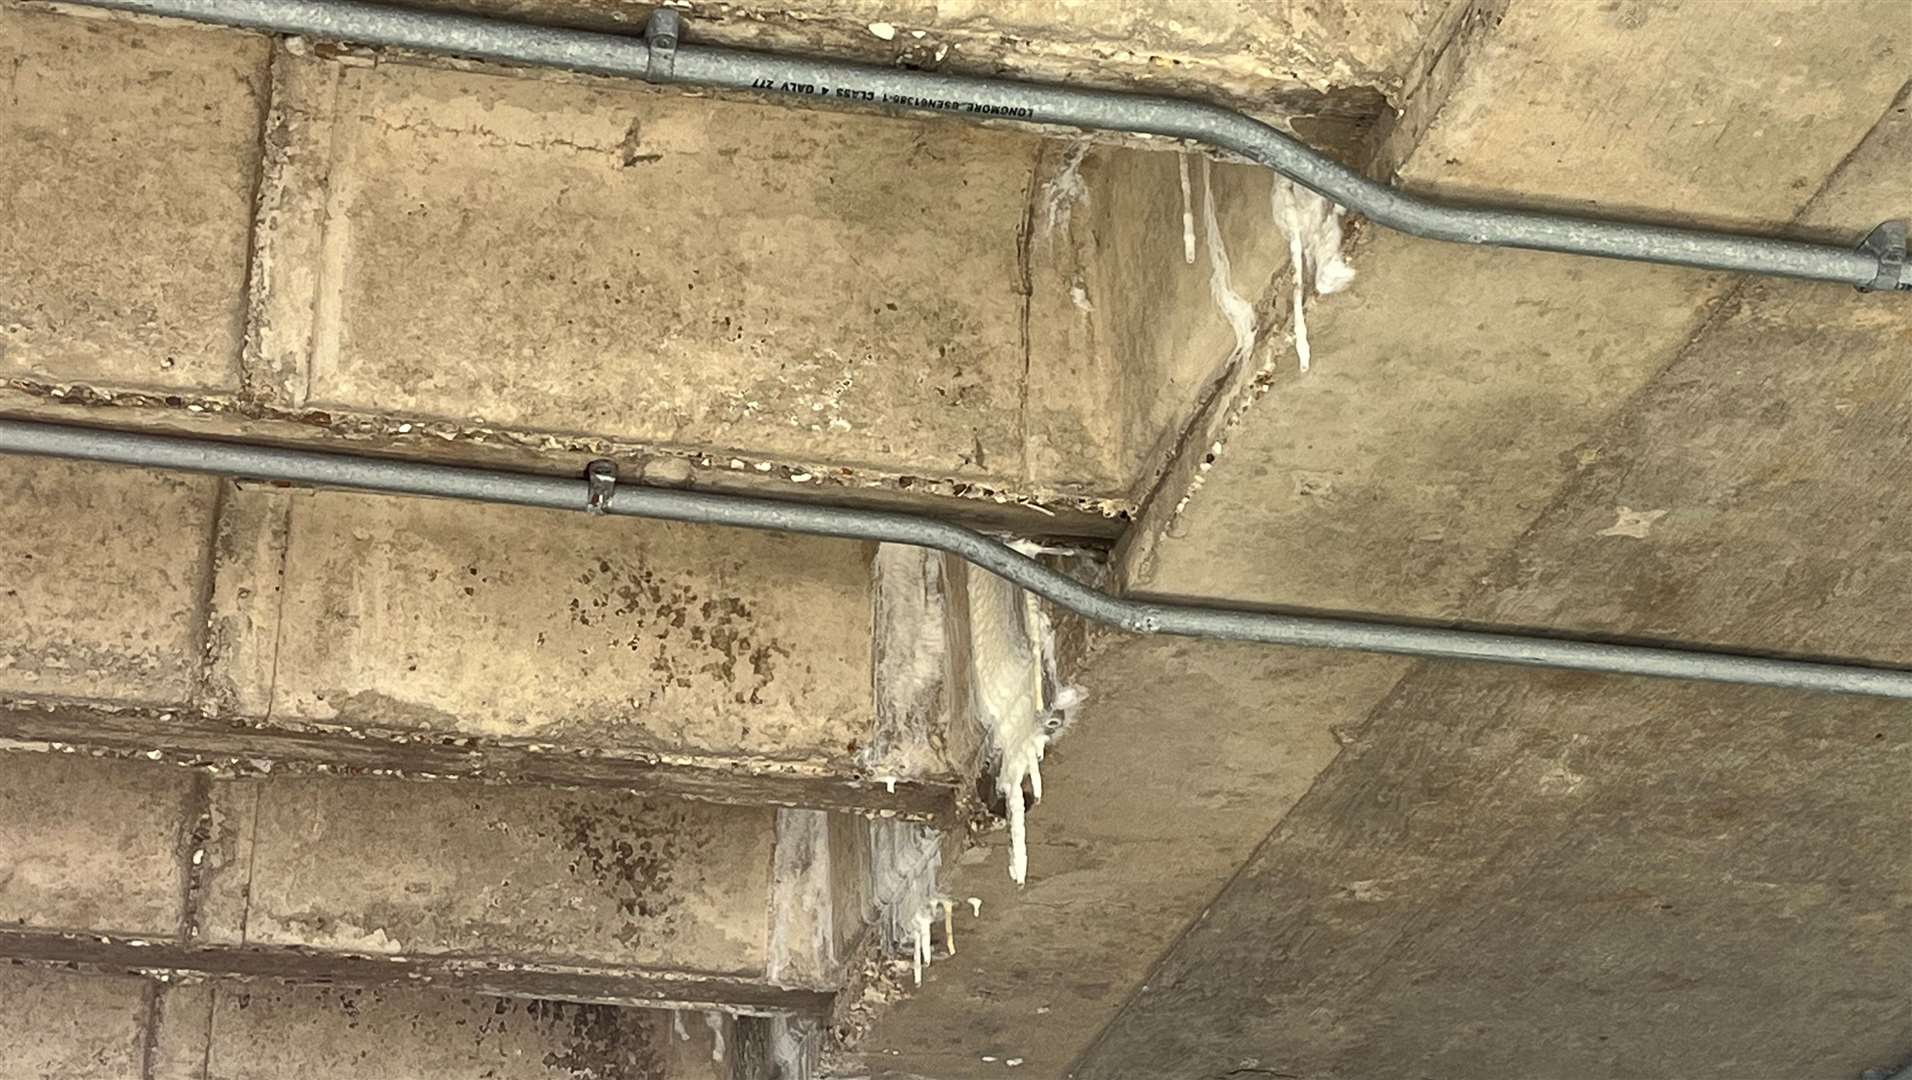 White stalactites hanging from the ceiling of the car park have now been removed